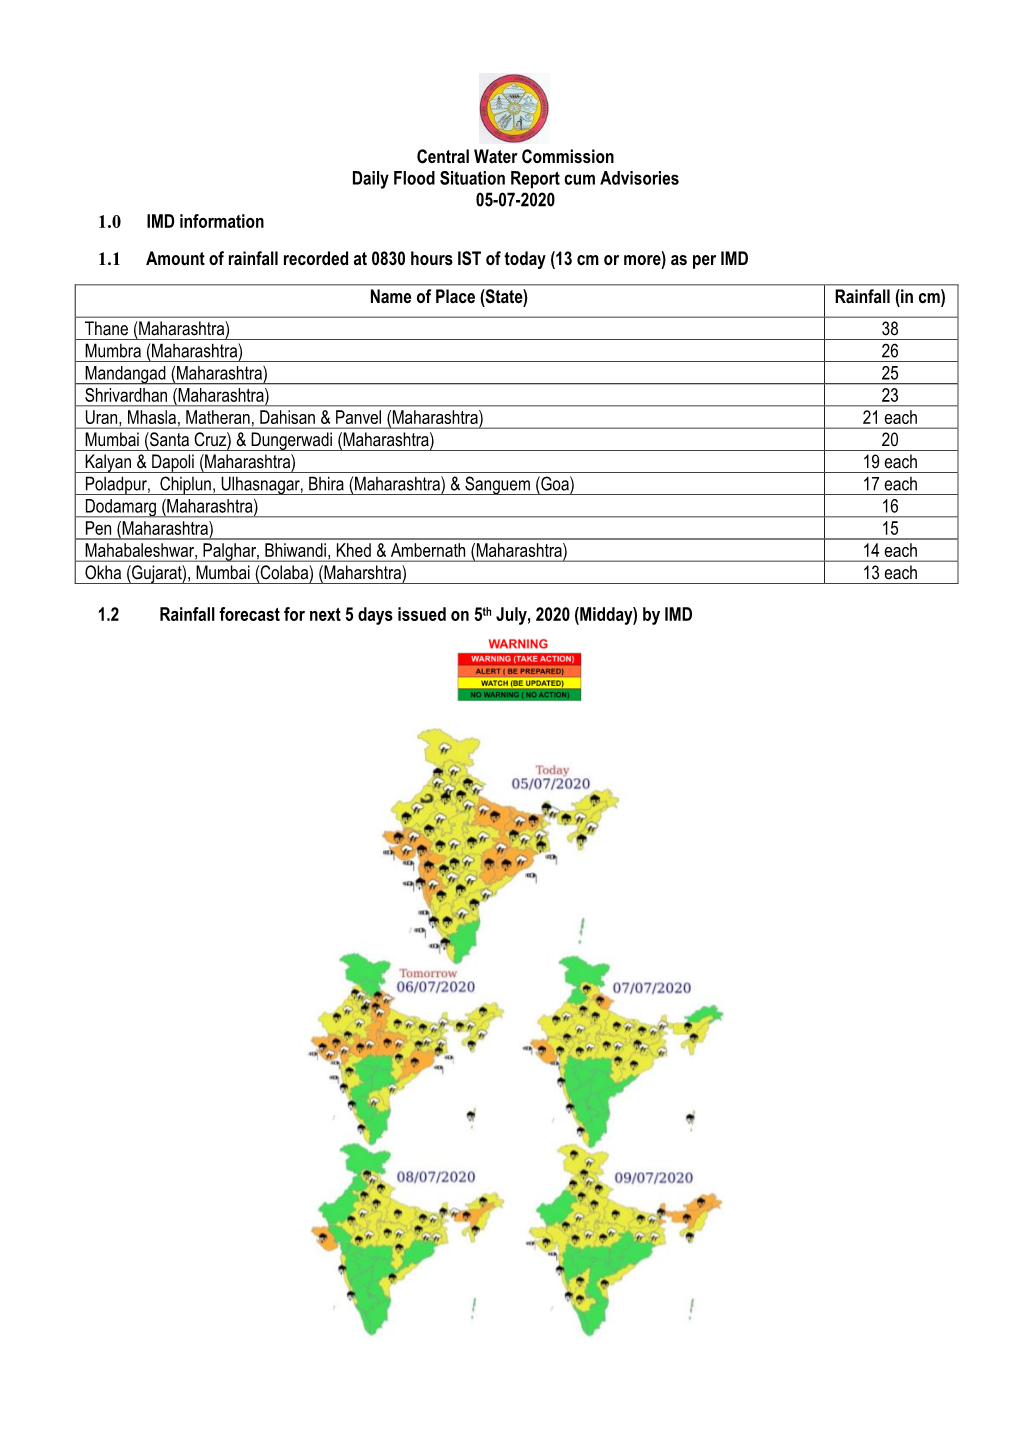 Central Water Commission Daily Flood Situation Report Cum Advisories 05-07-2020 1.0 IMD Information 1.1 Amount of Rainfall Recor